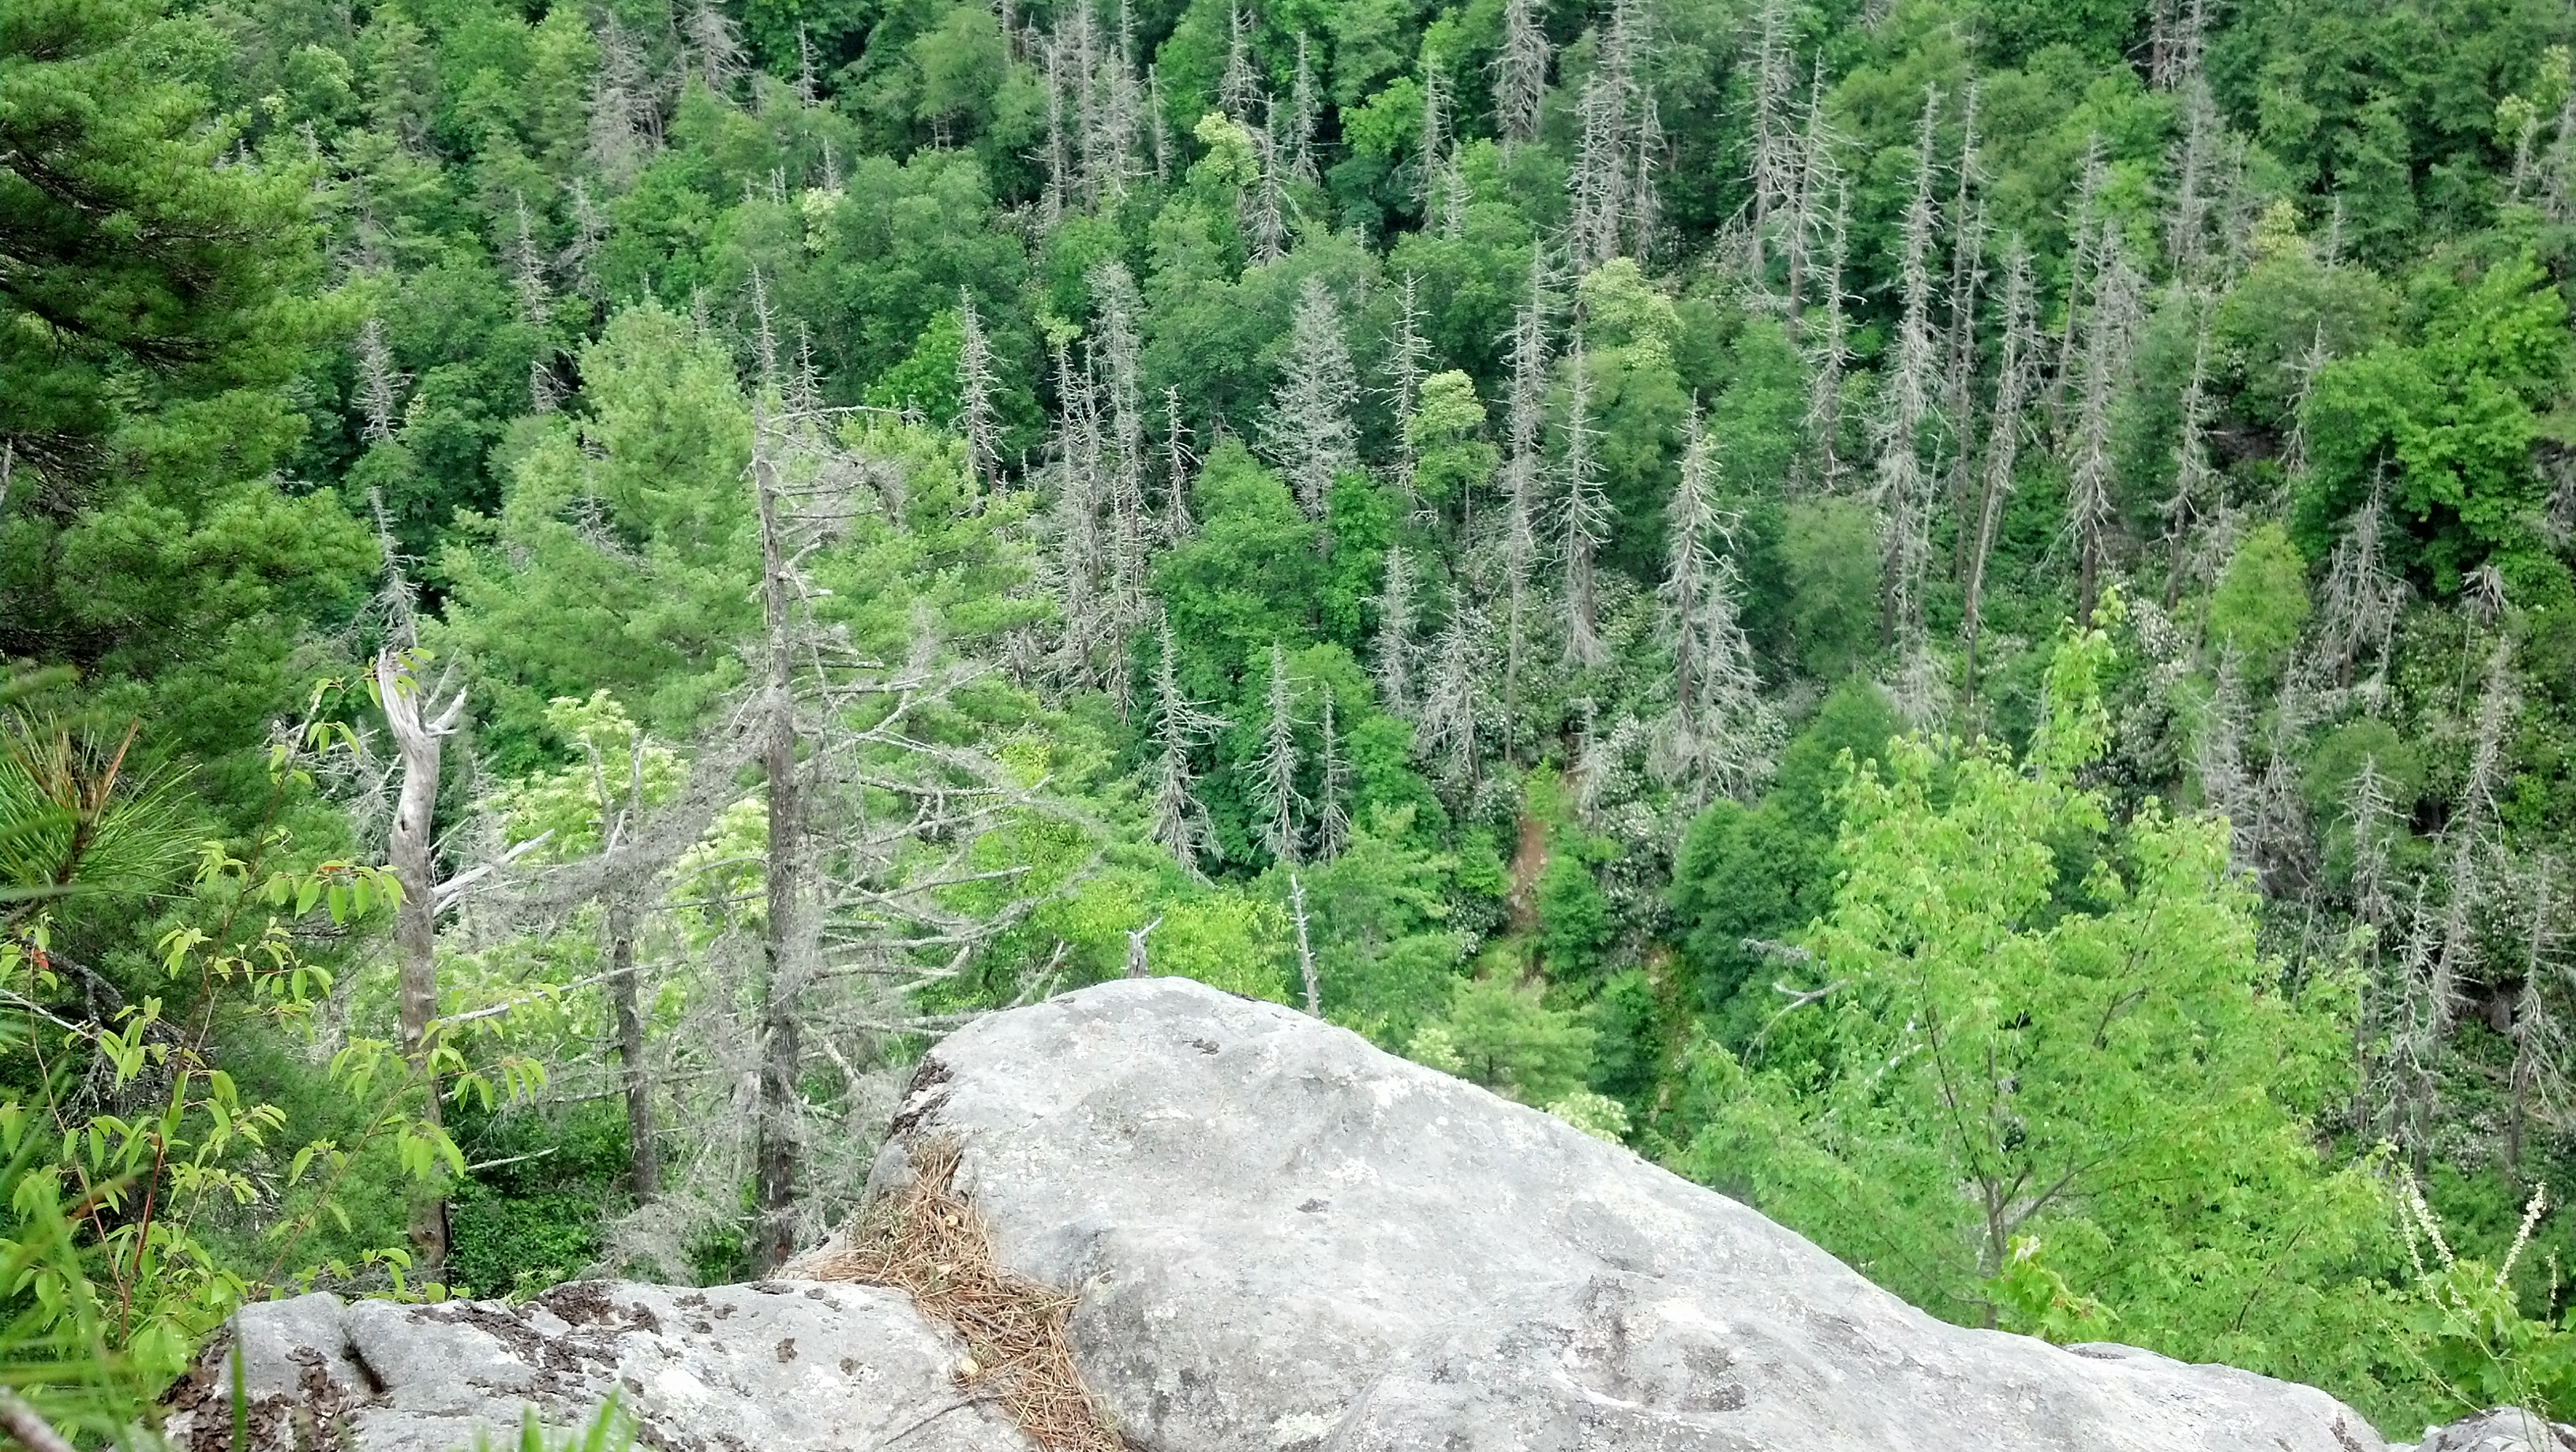 Hemlock forests in Linville Gorge, NC